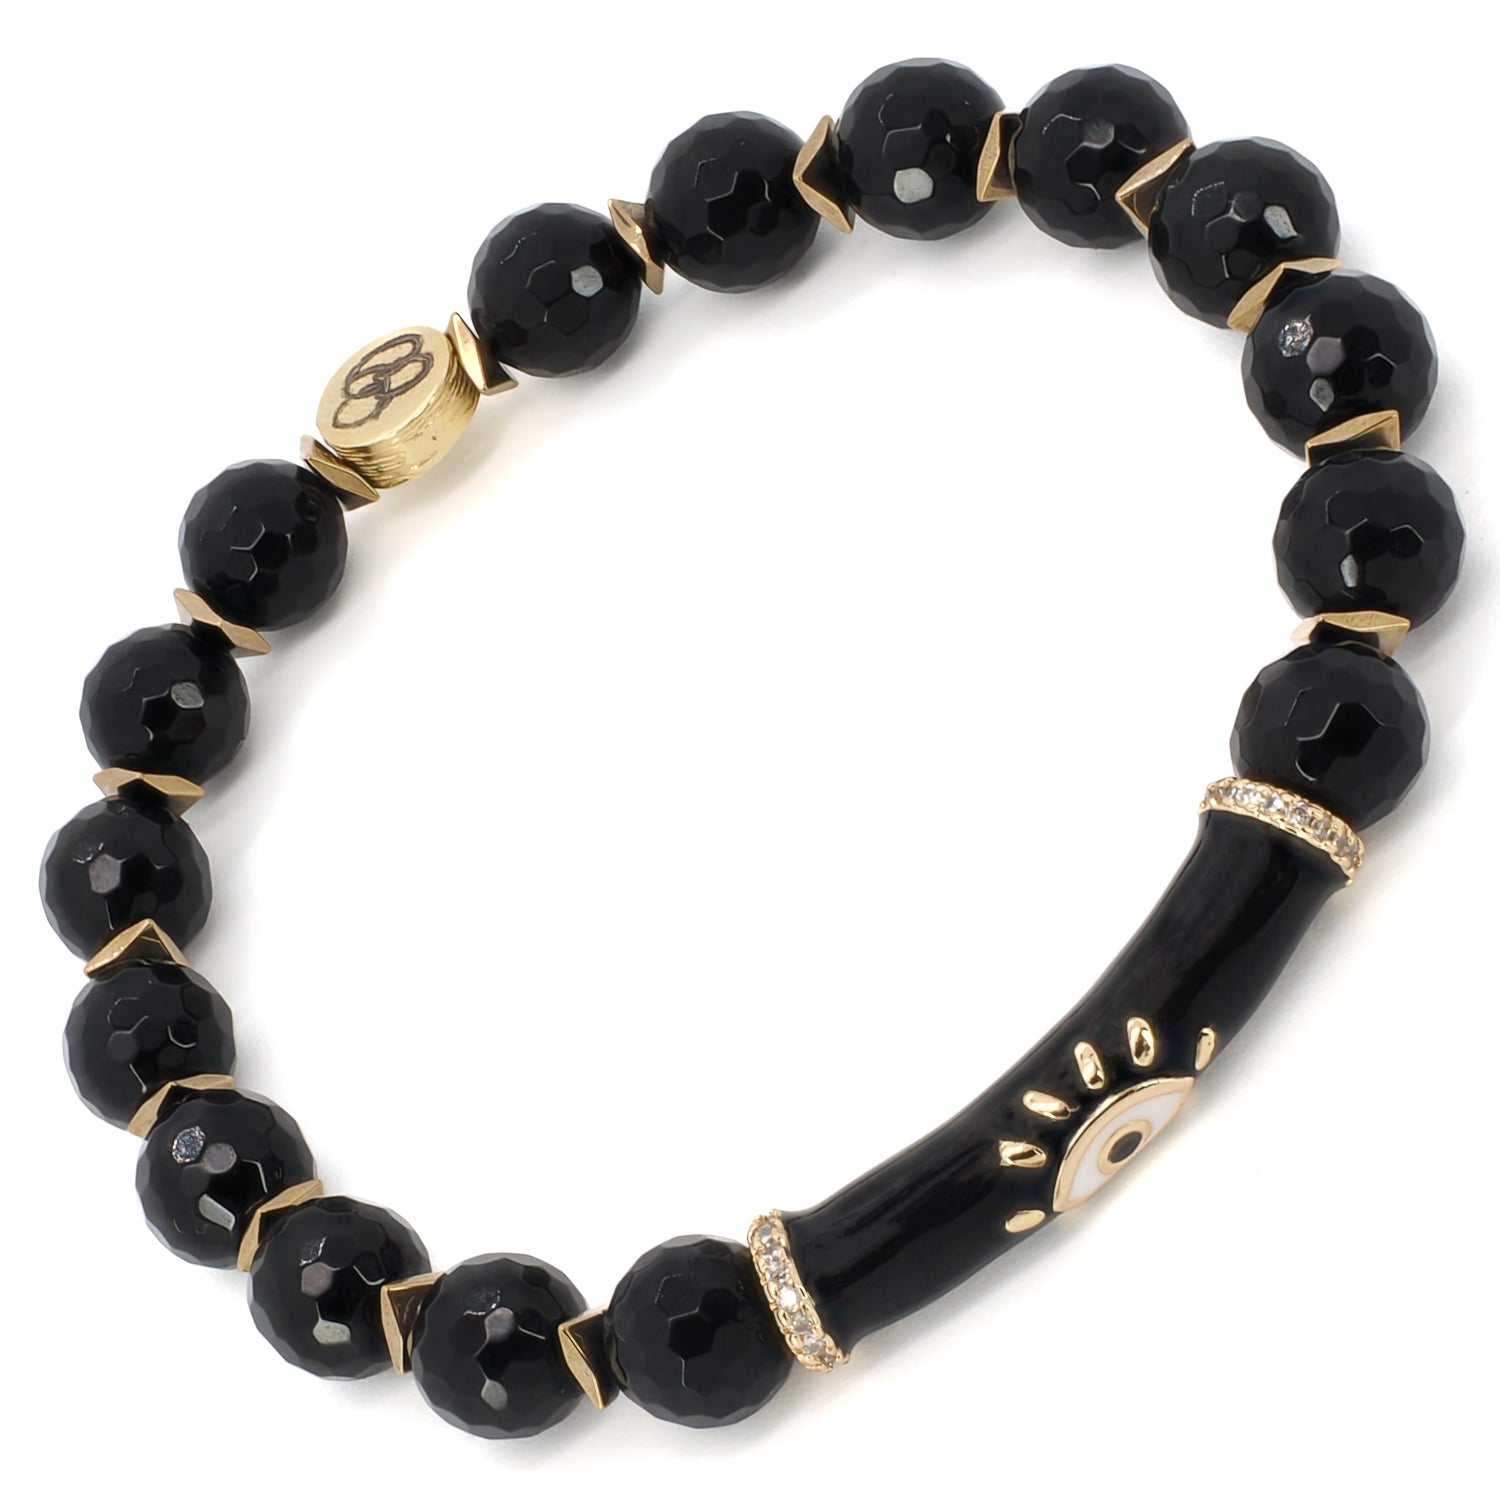 Beautifully Handcrafted Black Onyx and Gold Bracelet